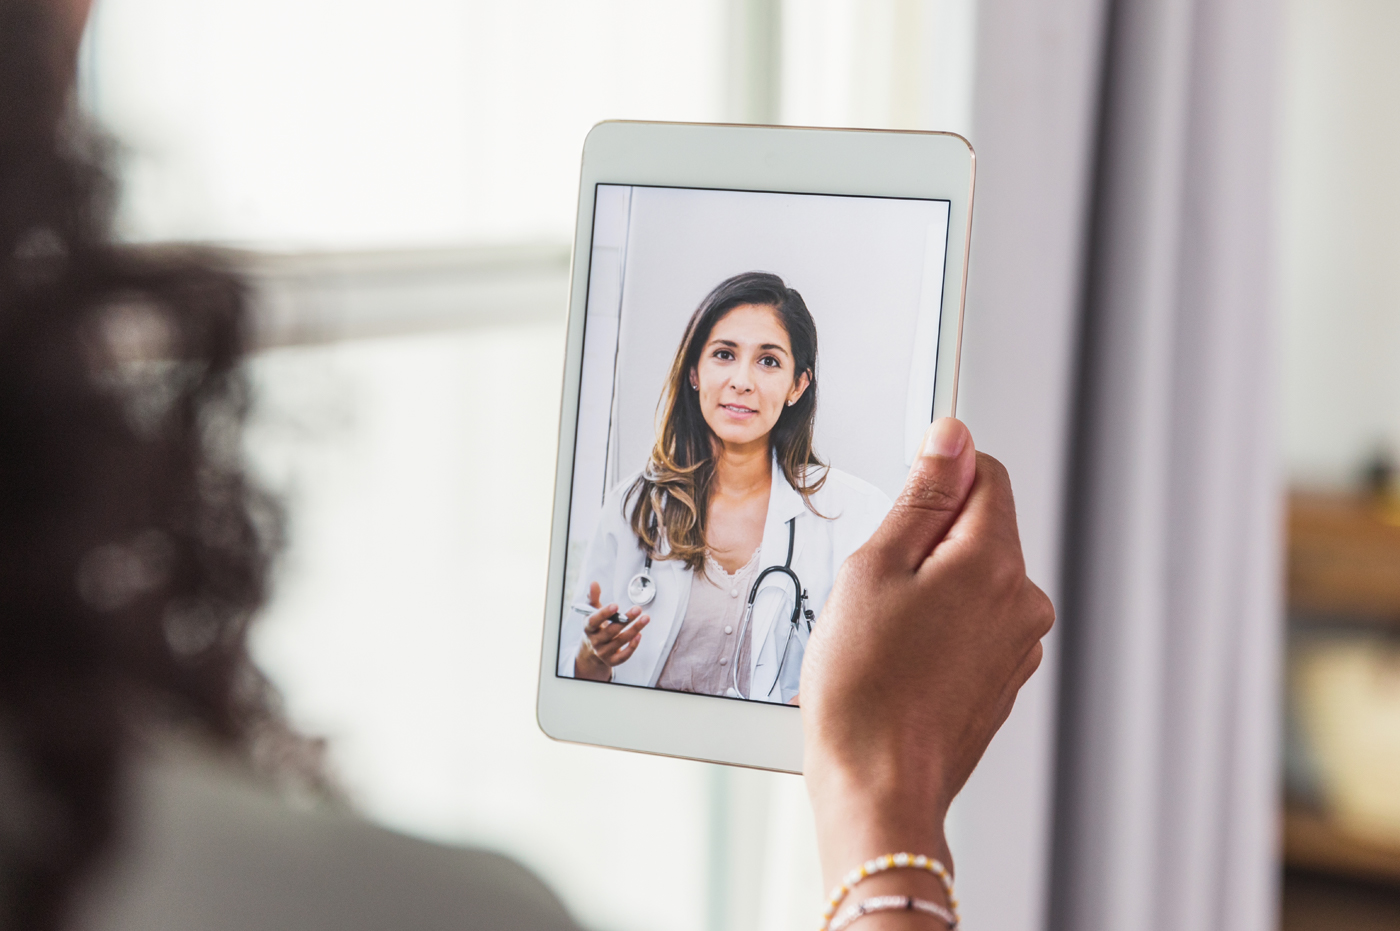 Female doctor on iPad screen during a virtual appointment.